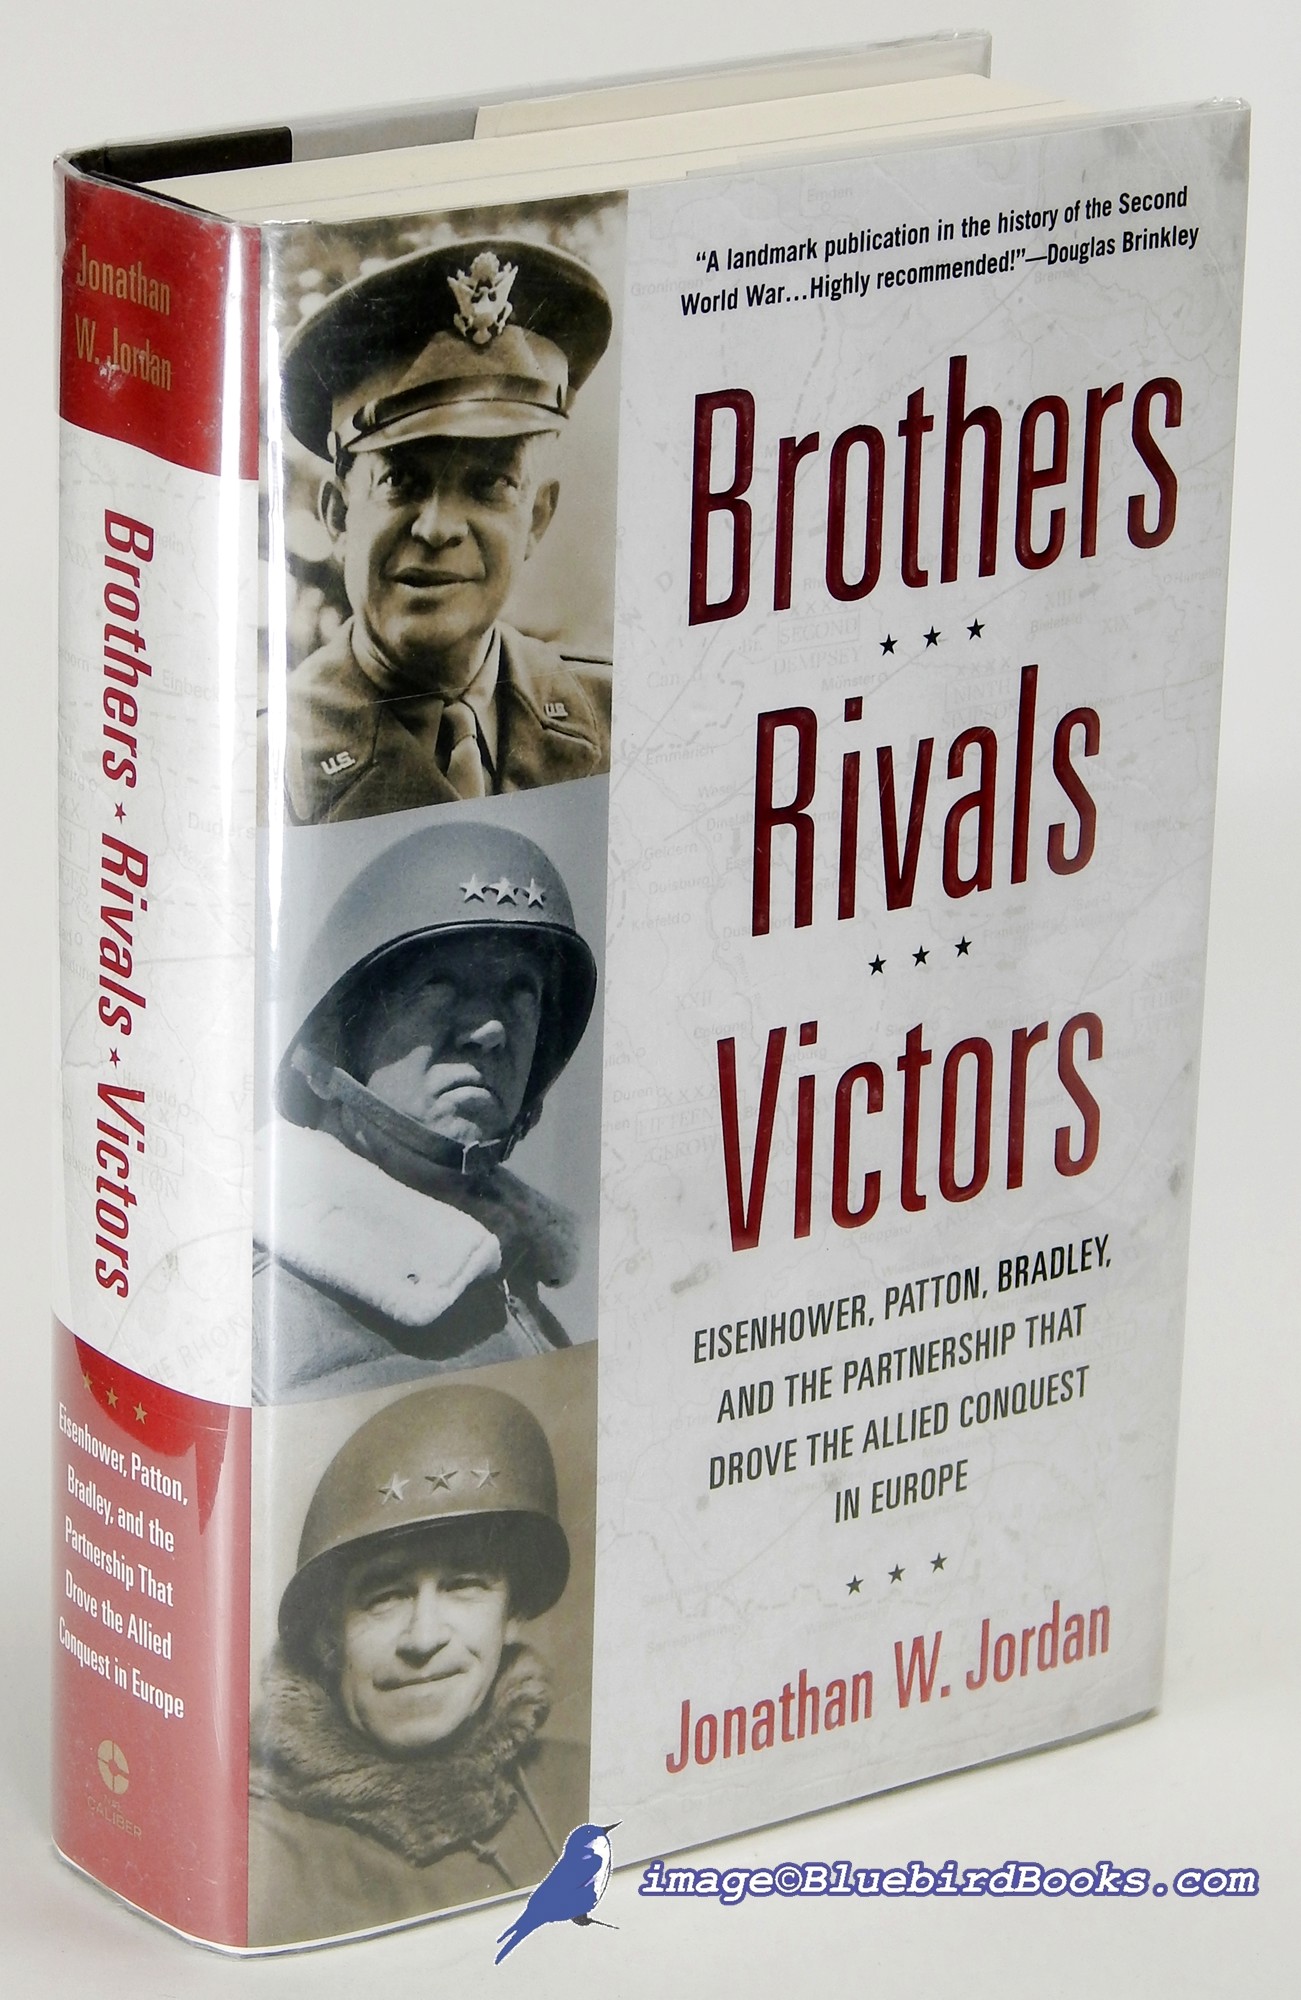 JORDAN, JONATHAN W. - Brothers, Rivals, Victors: Eisenhower, Patton, Bradley and the Partnership That Drove the Allied Conquest in Europe